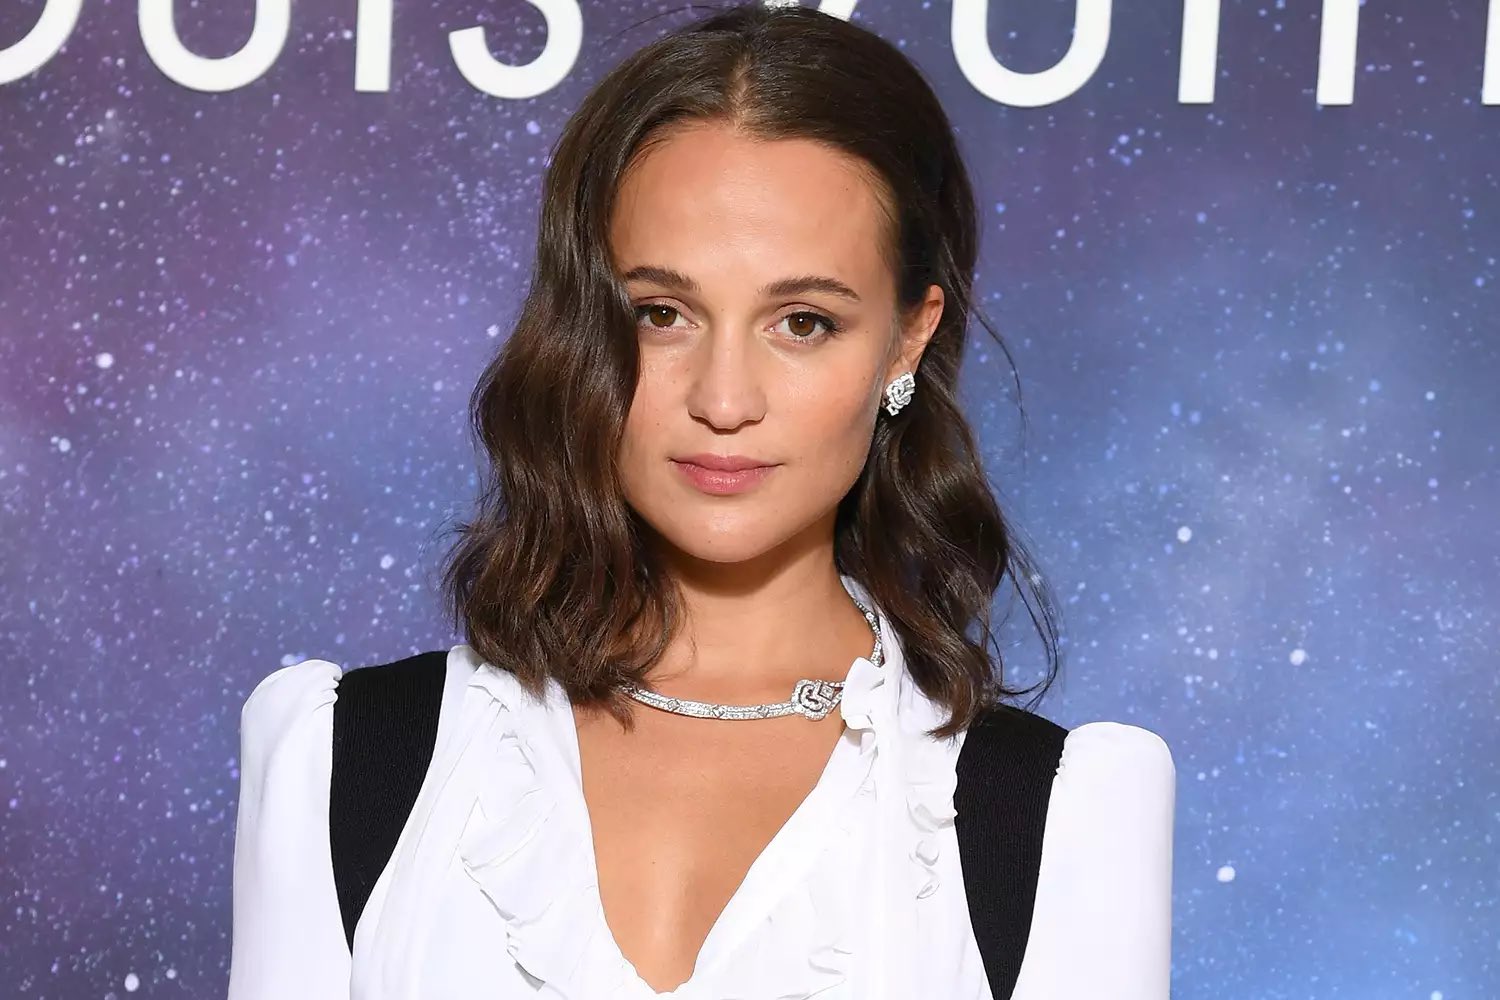 A First Look at Alicia Vikander in Olivier Assayas's Bold New